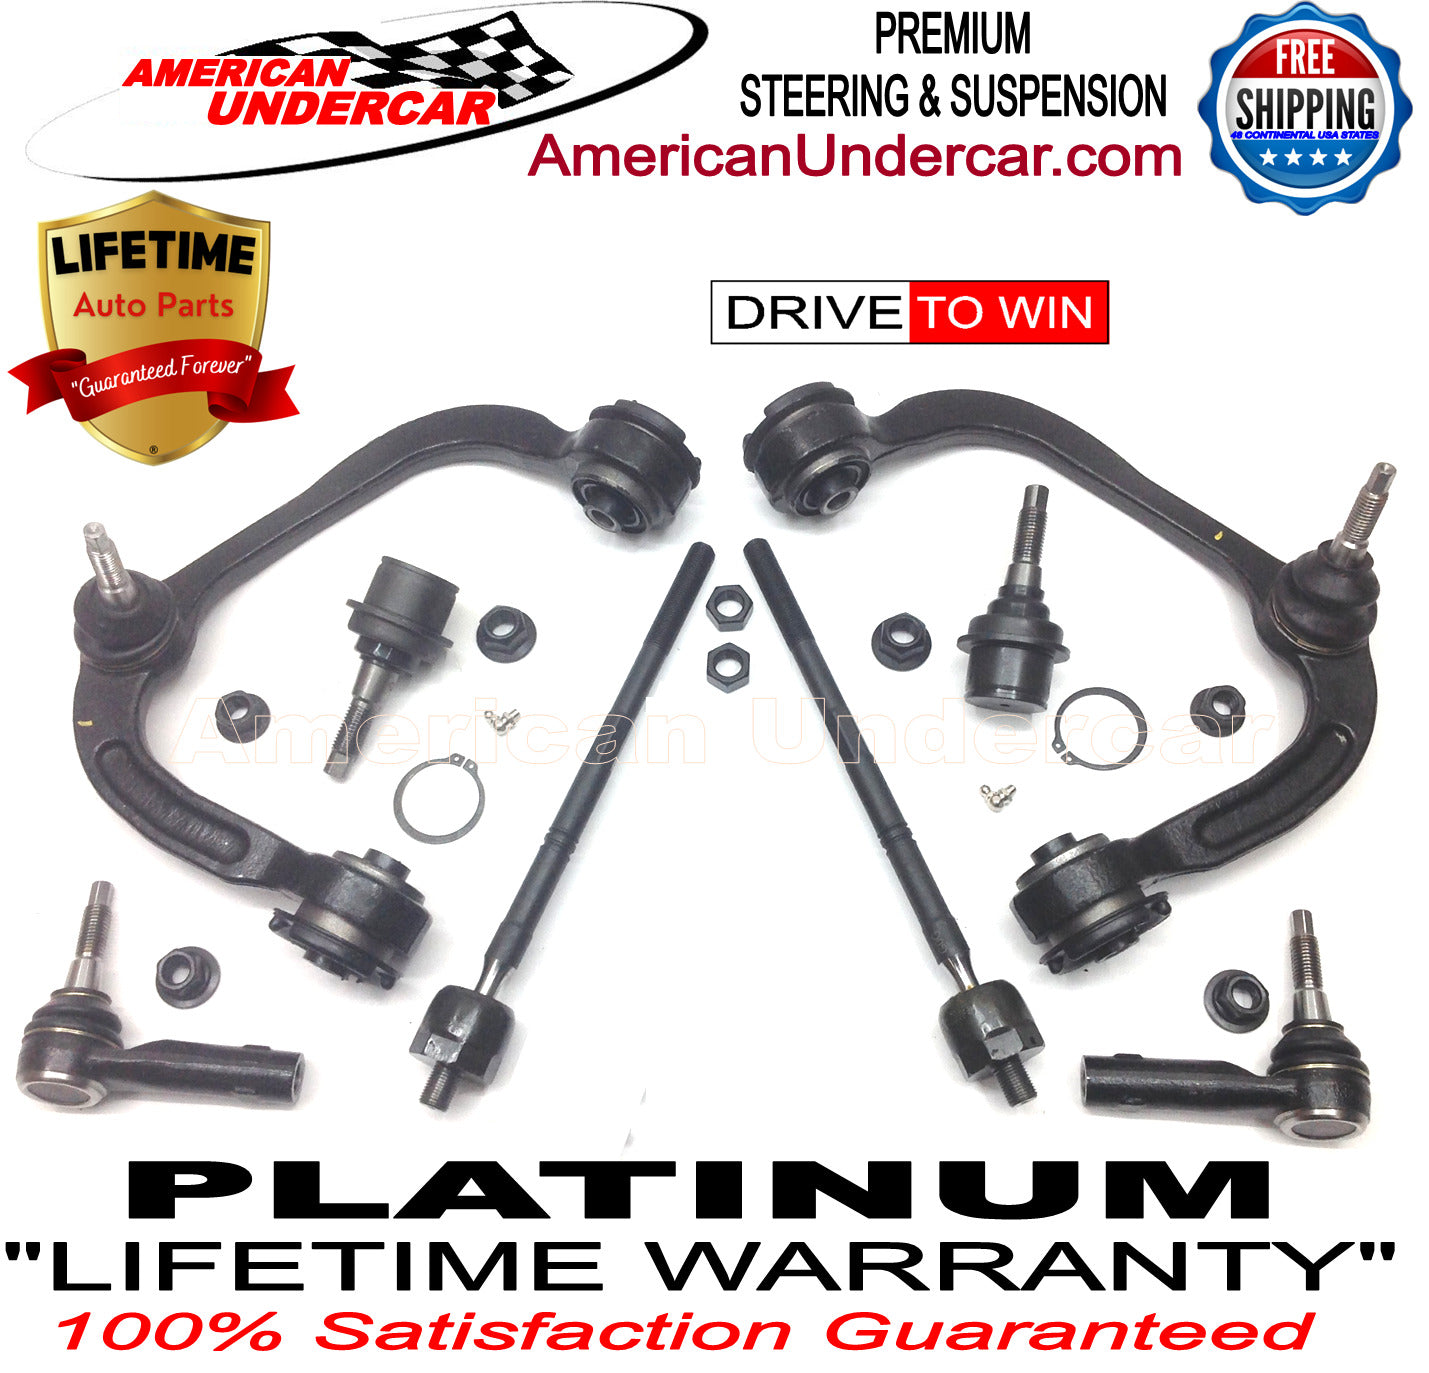 Lifetime Ball Joints Control Arms Tie Rod Steering Kit for 2004-2008 Ford F150 4x4